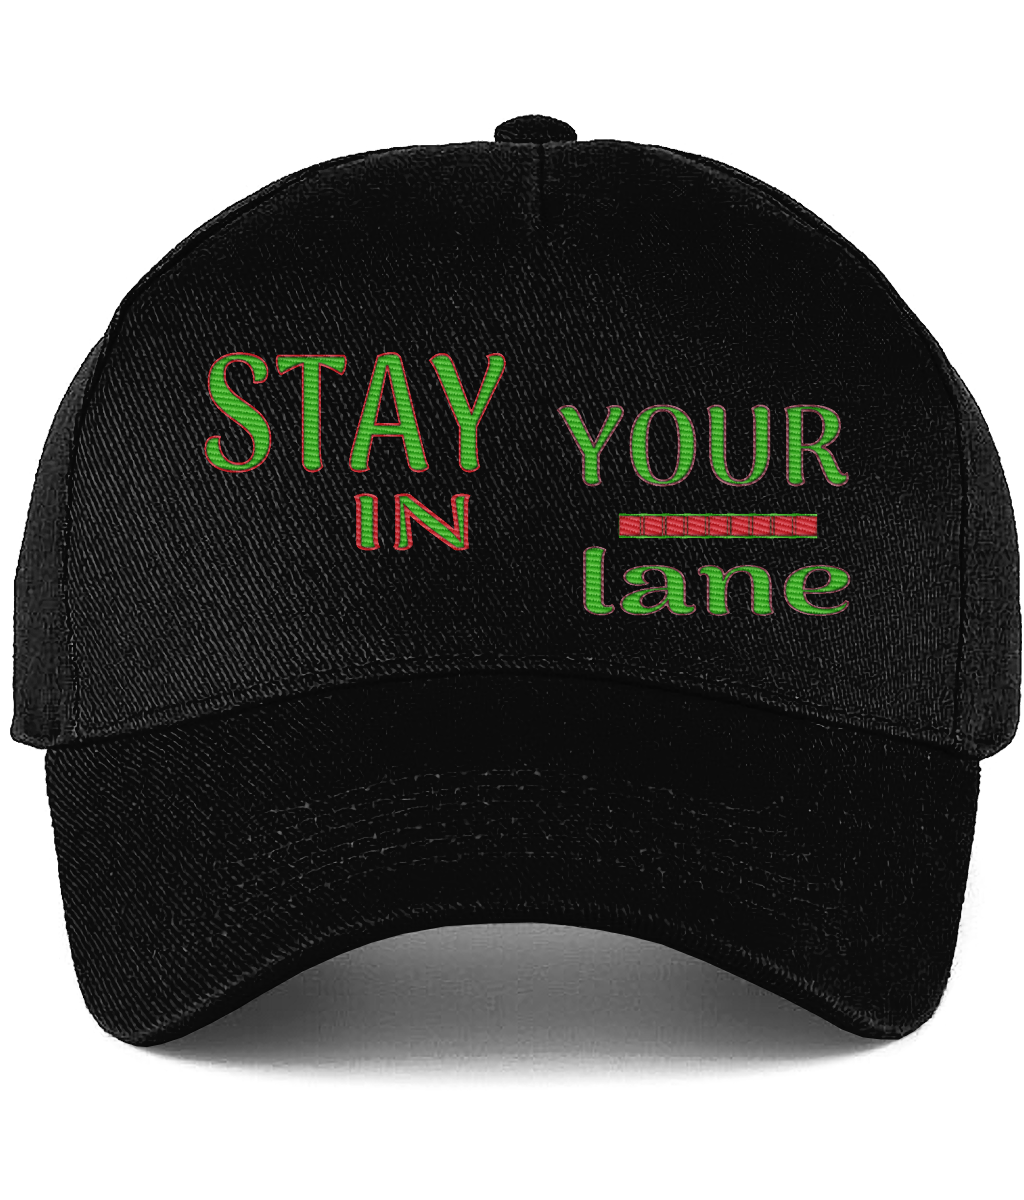 STAY IN YOUR lane 01-01 Designer Embroidered Ultimate Cotton Drill Baseball Cap (8 colors)